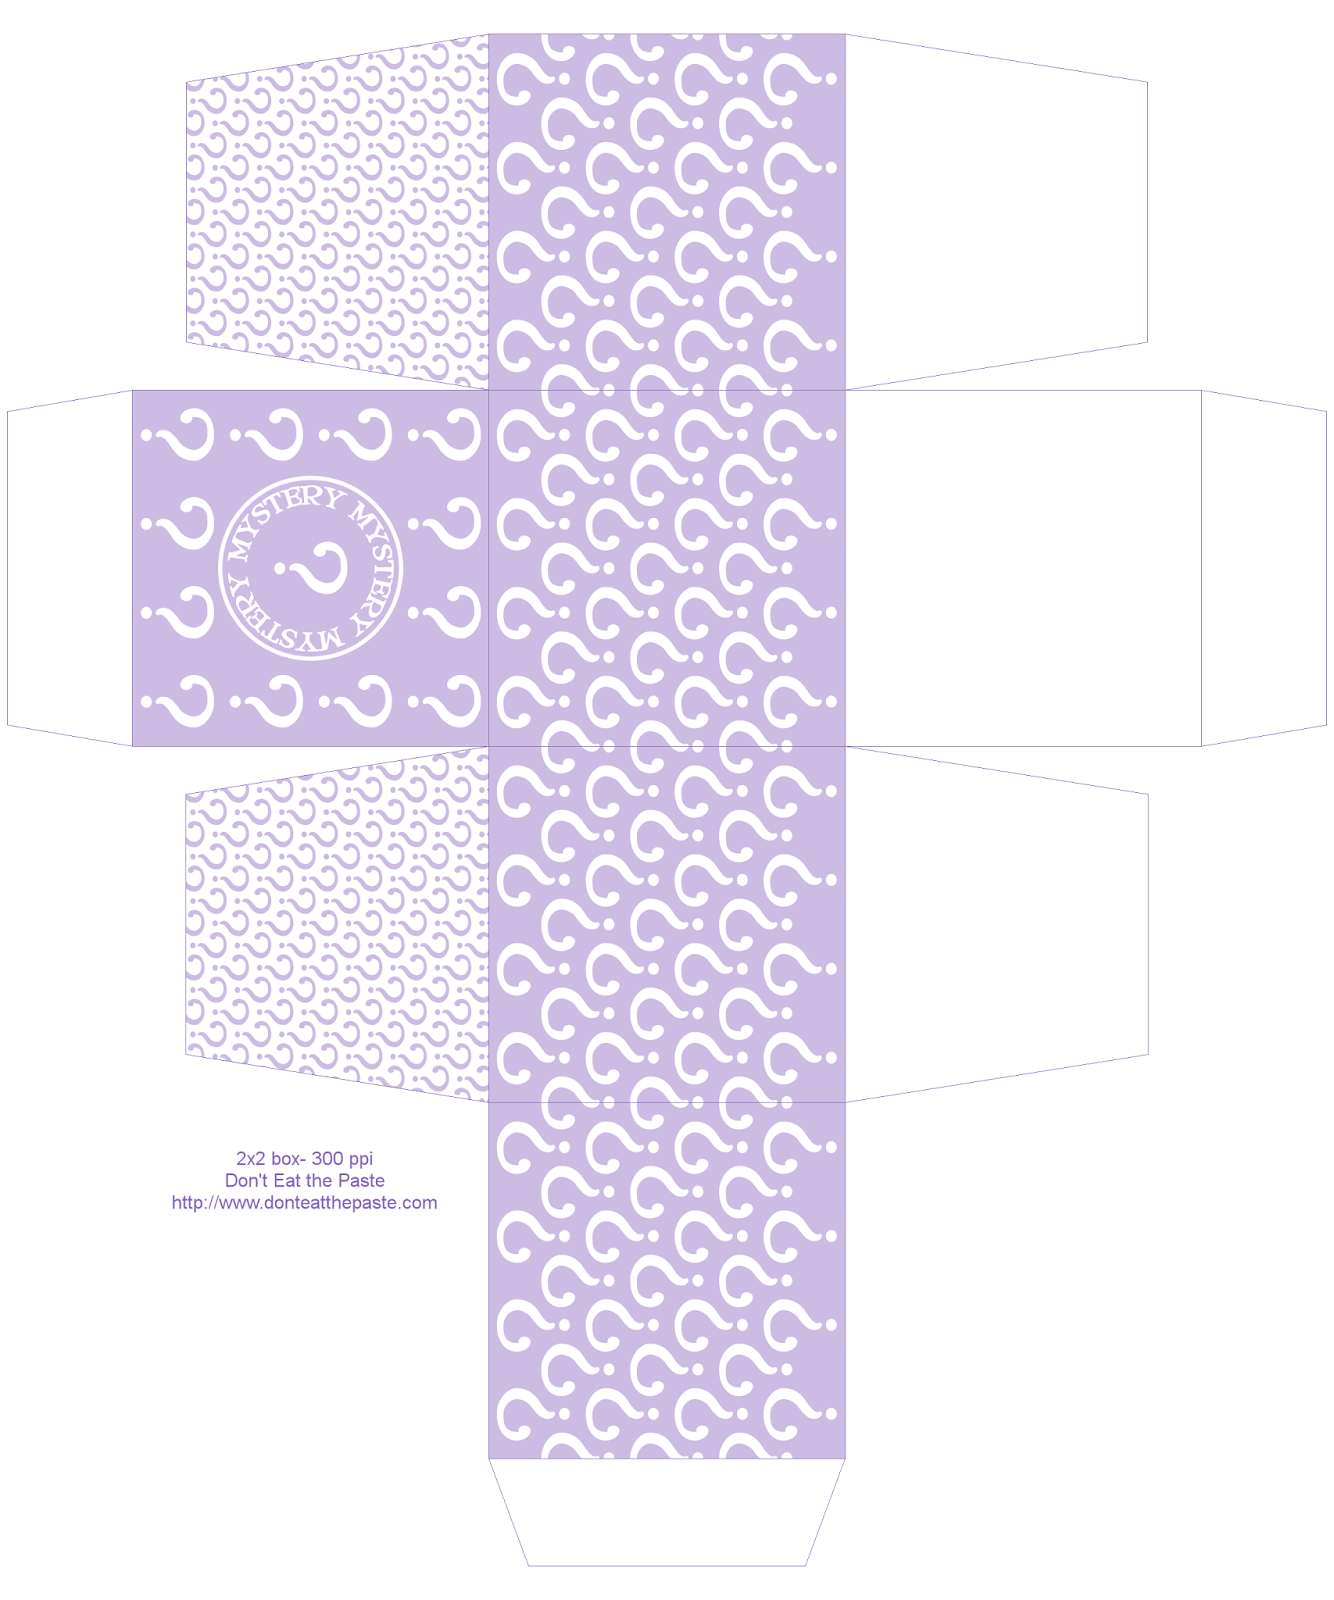 Printable mystery box- also available in orange, green and teal #paper #crafts #partyideas